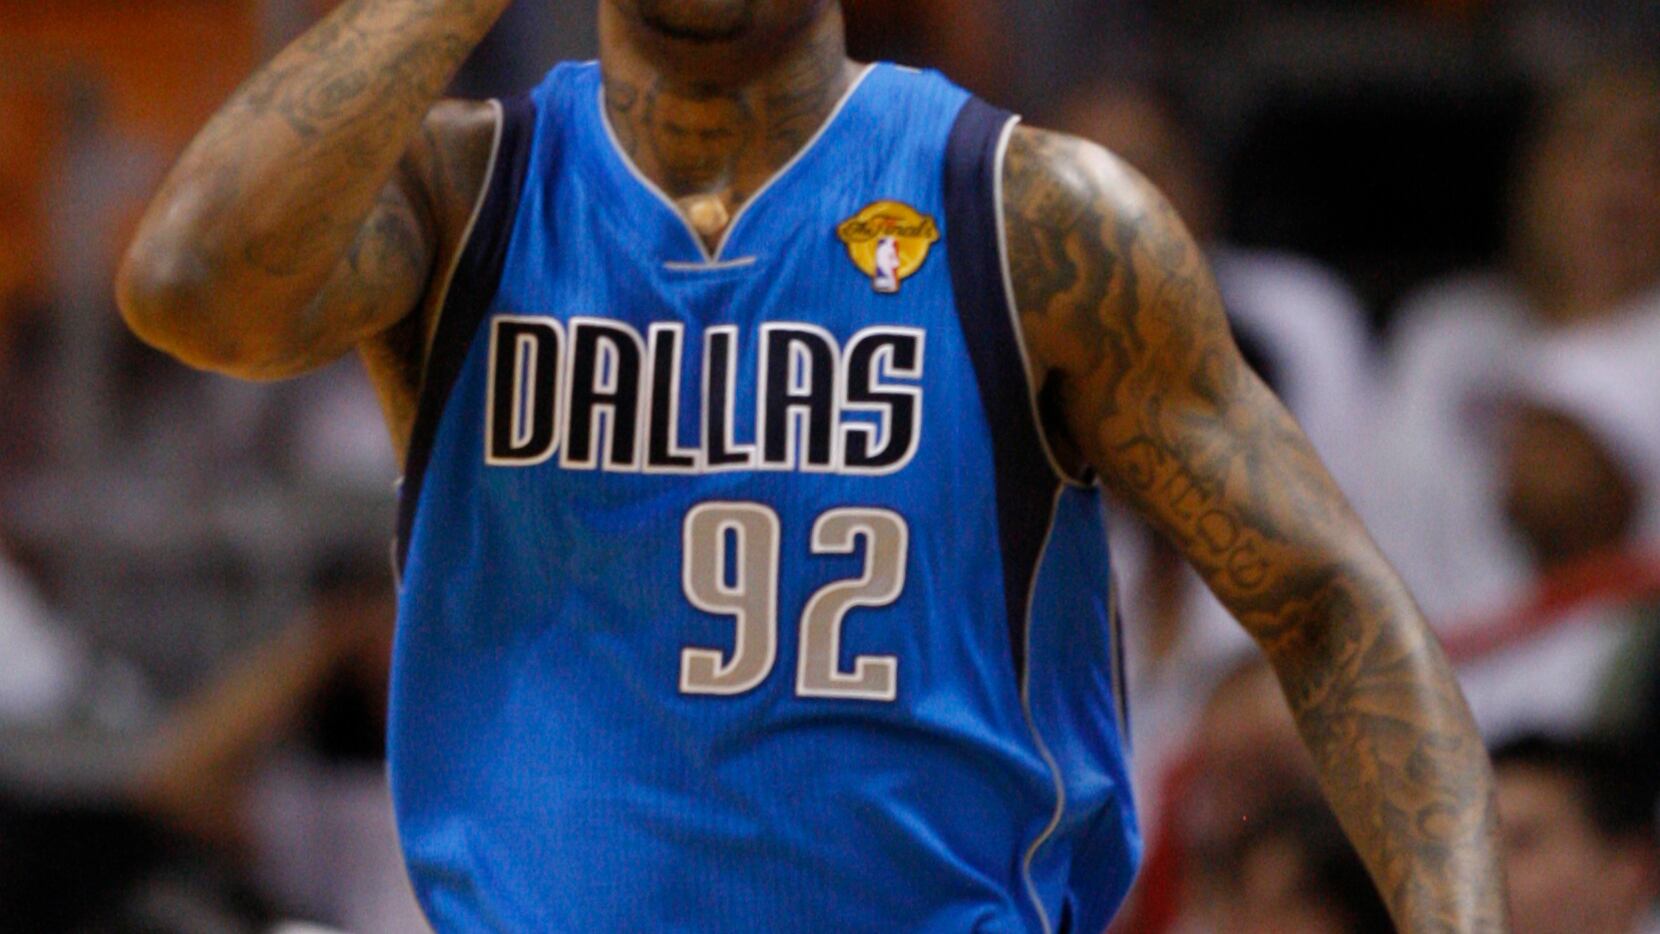 Years after calling him 'overrated,' DeShawn Stevenson wants LeBron James  to get him a job in Miami